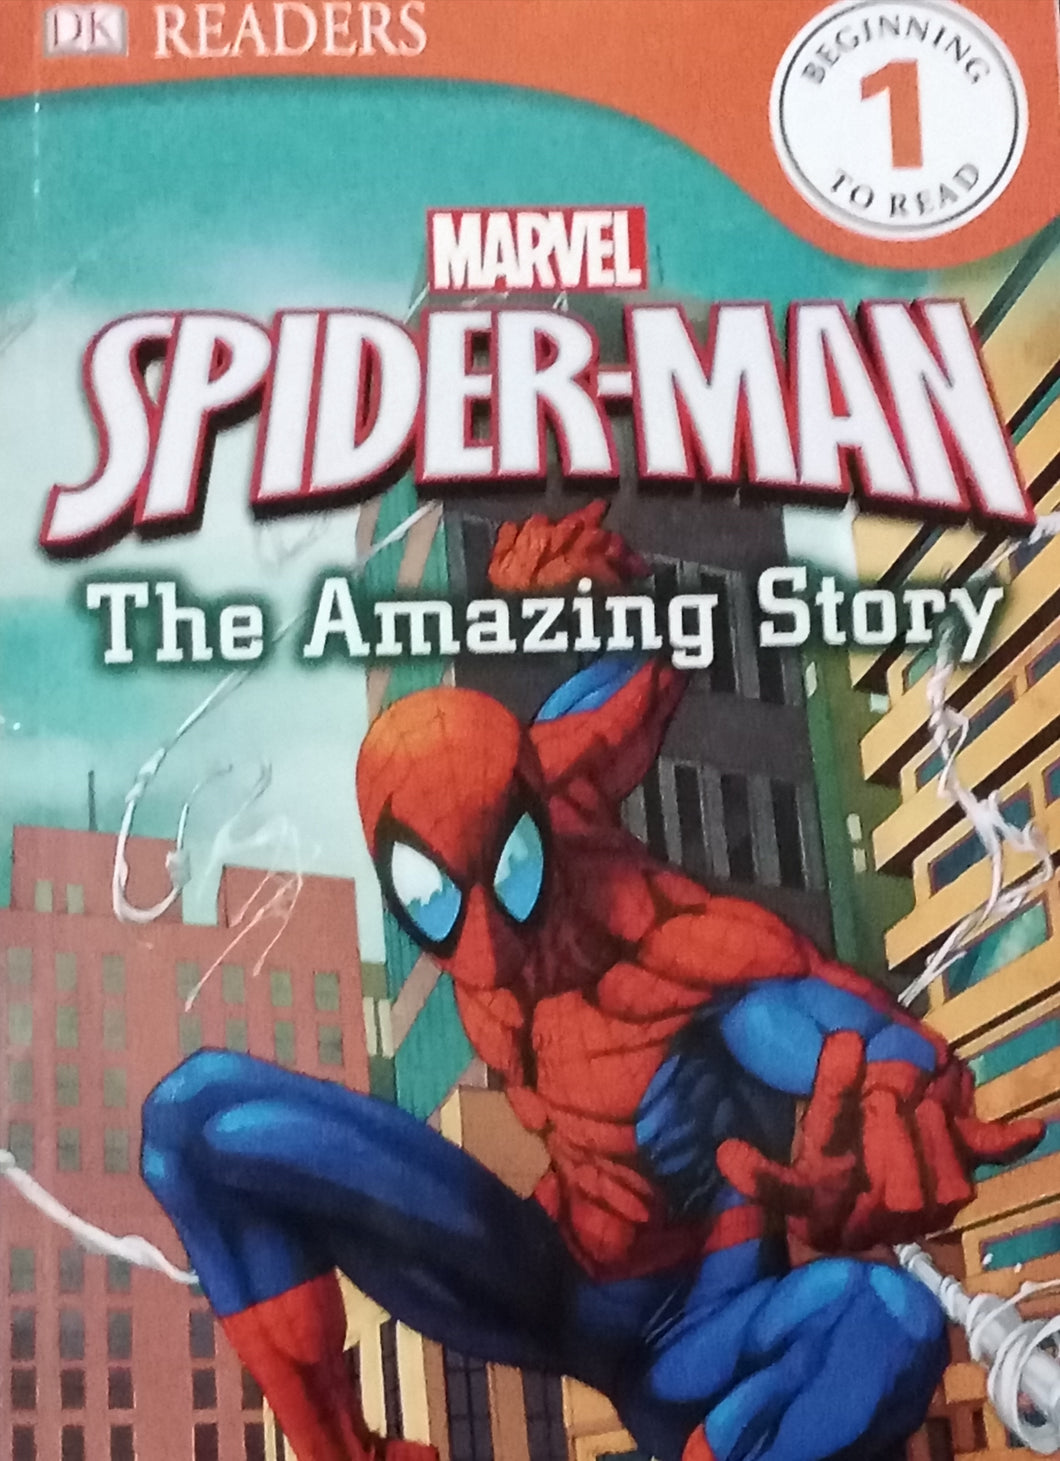 DK Readers: Spider-Man The Amazing Story